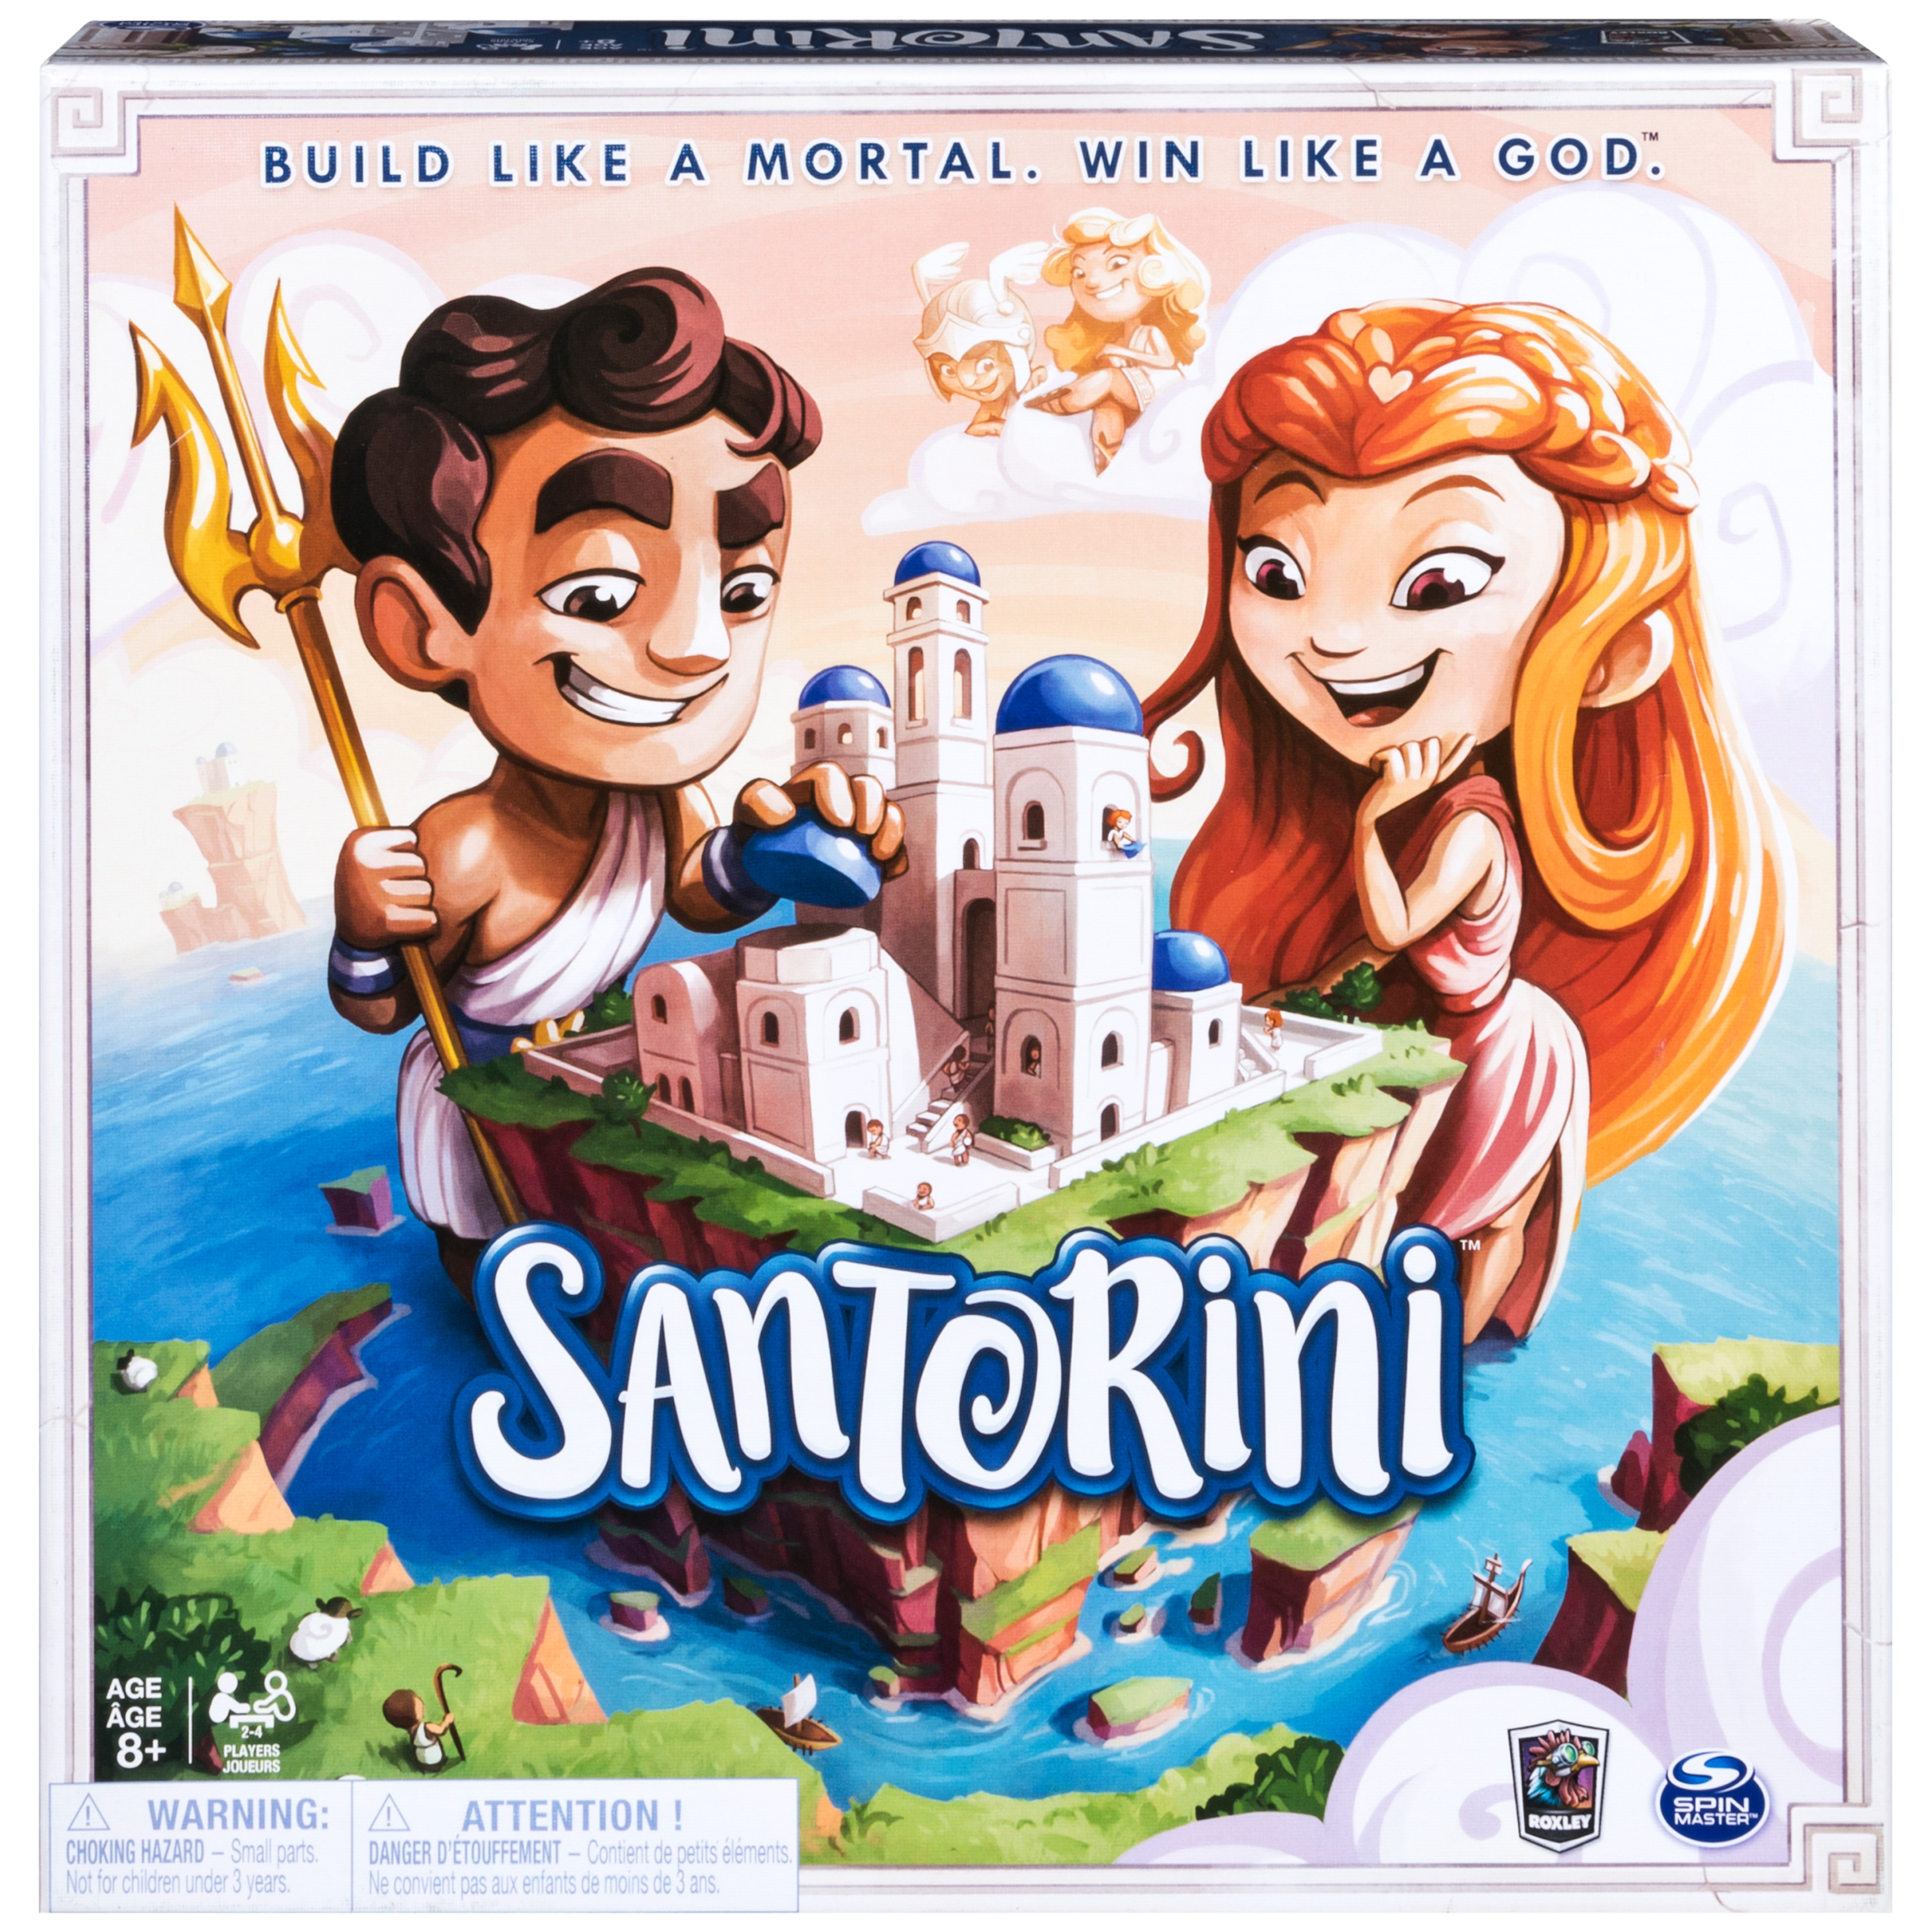 Santorini, Strategy Family Board Game 2-4 Players Classic Fun Building Greek Mythology Card Game, for Kids & Adults Ages 8 and up - image 1 of 6